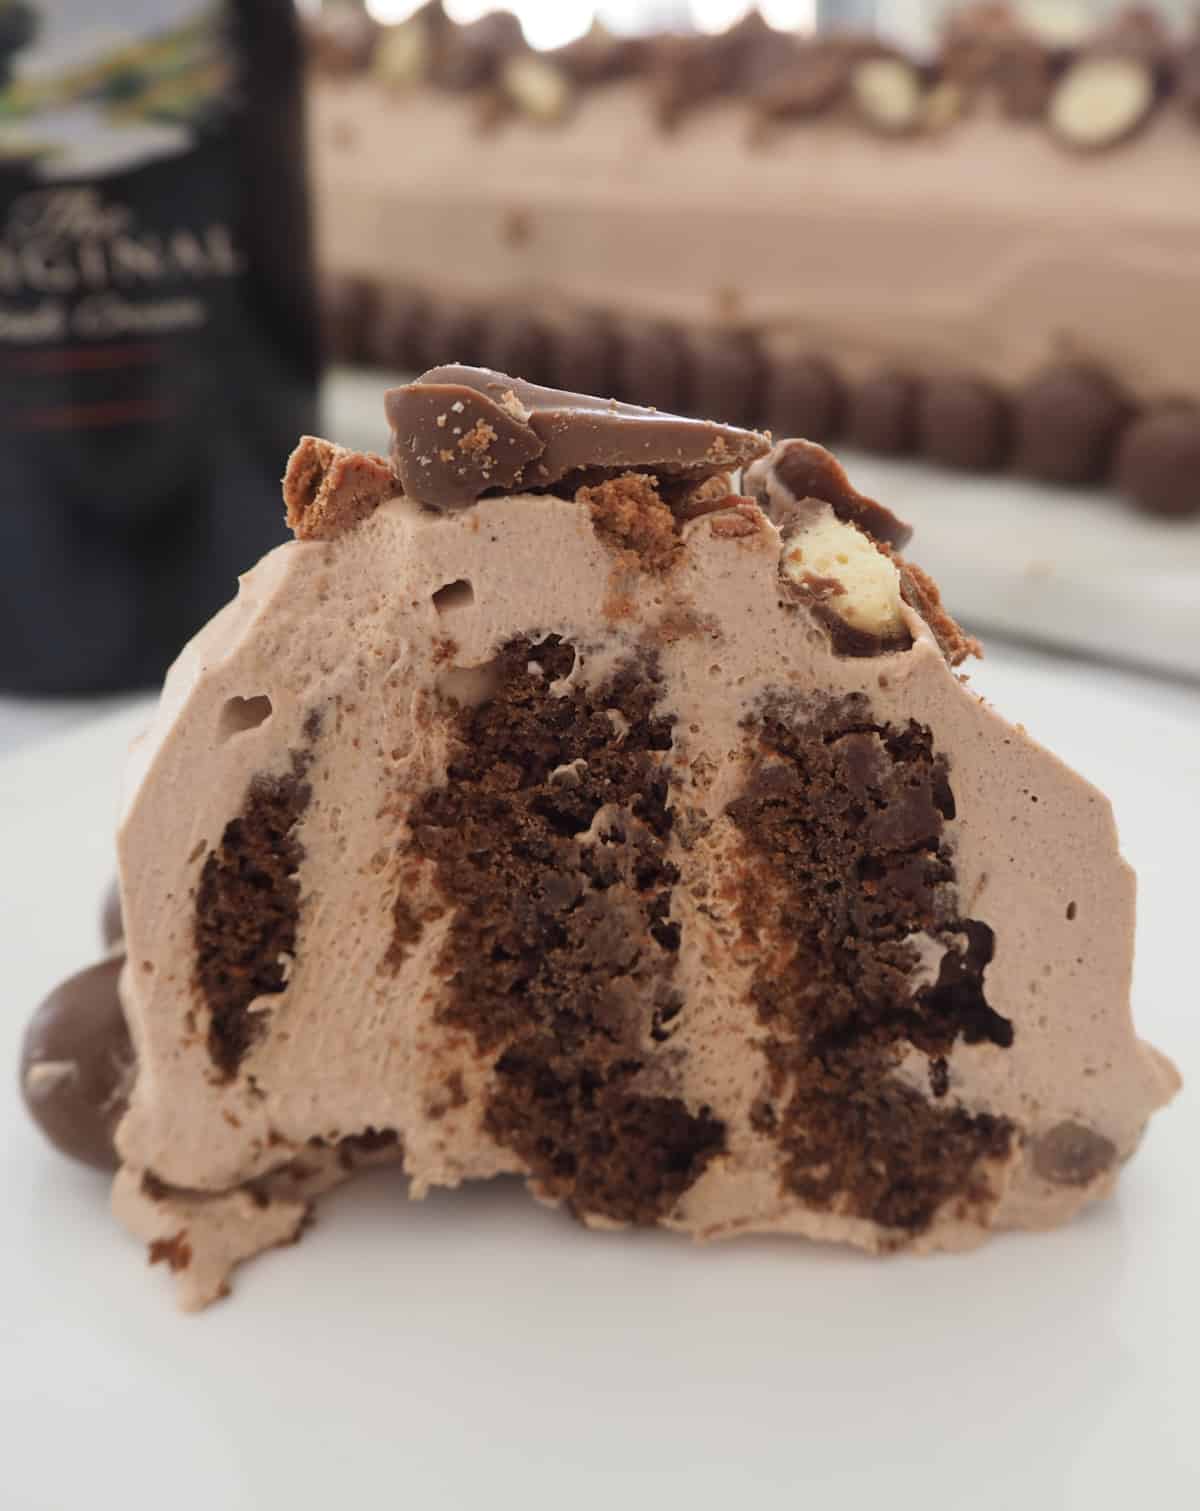 Side view of a piece of baileys chocolate ripple cake on a white plate. in the background is a bottle of Baileys Irish cream.